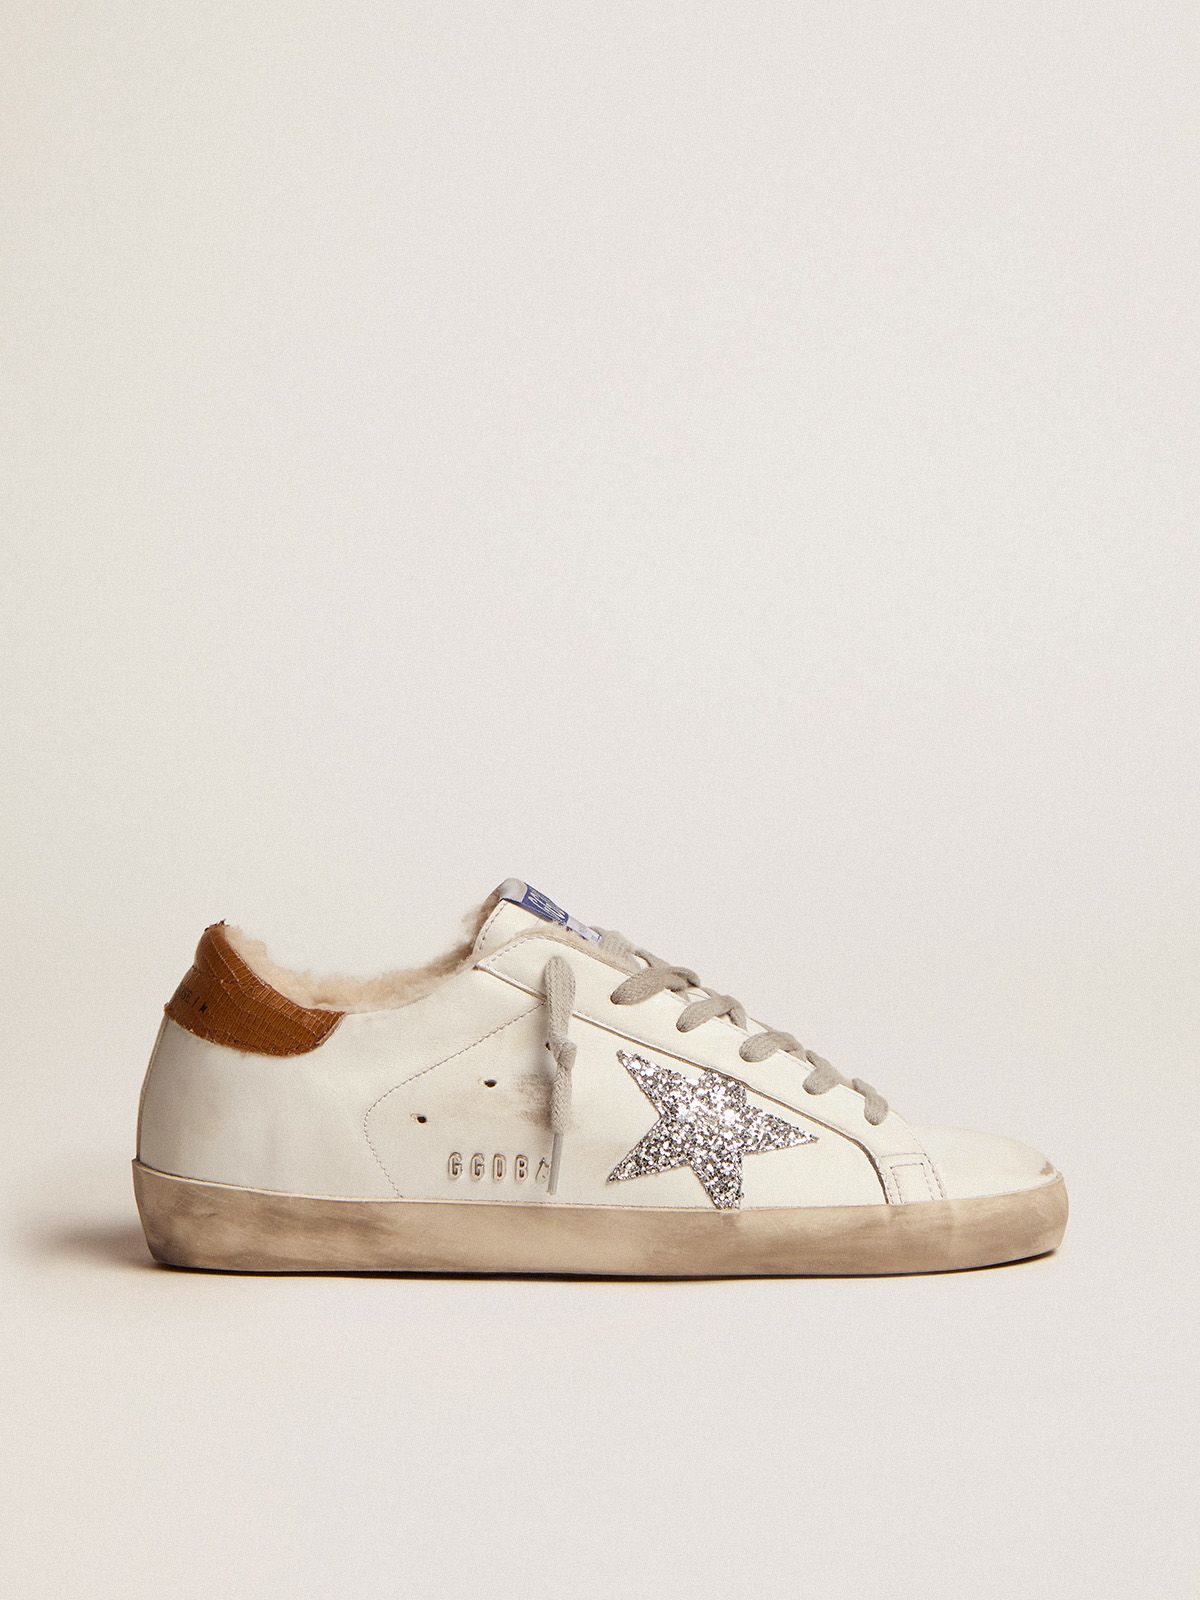 Sneakers Uomo Golden Goose Super-Star sneakers with shearling lining, silver glitter star and lizard-print dove-gray leather heel tab